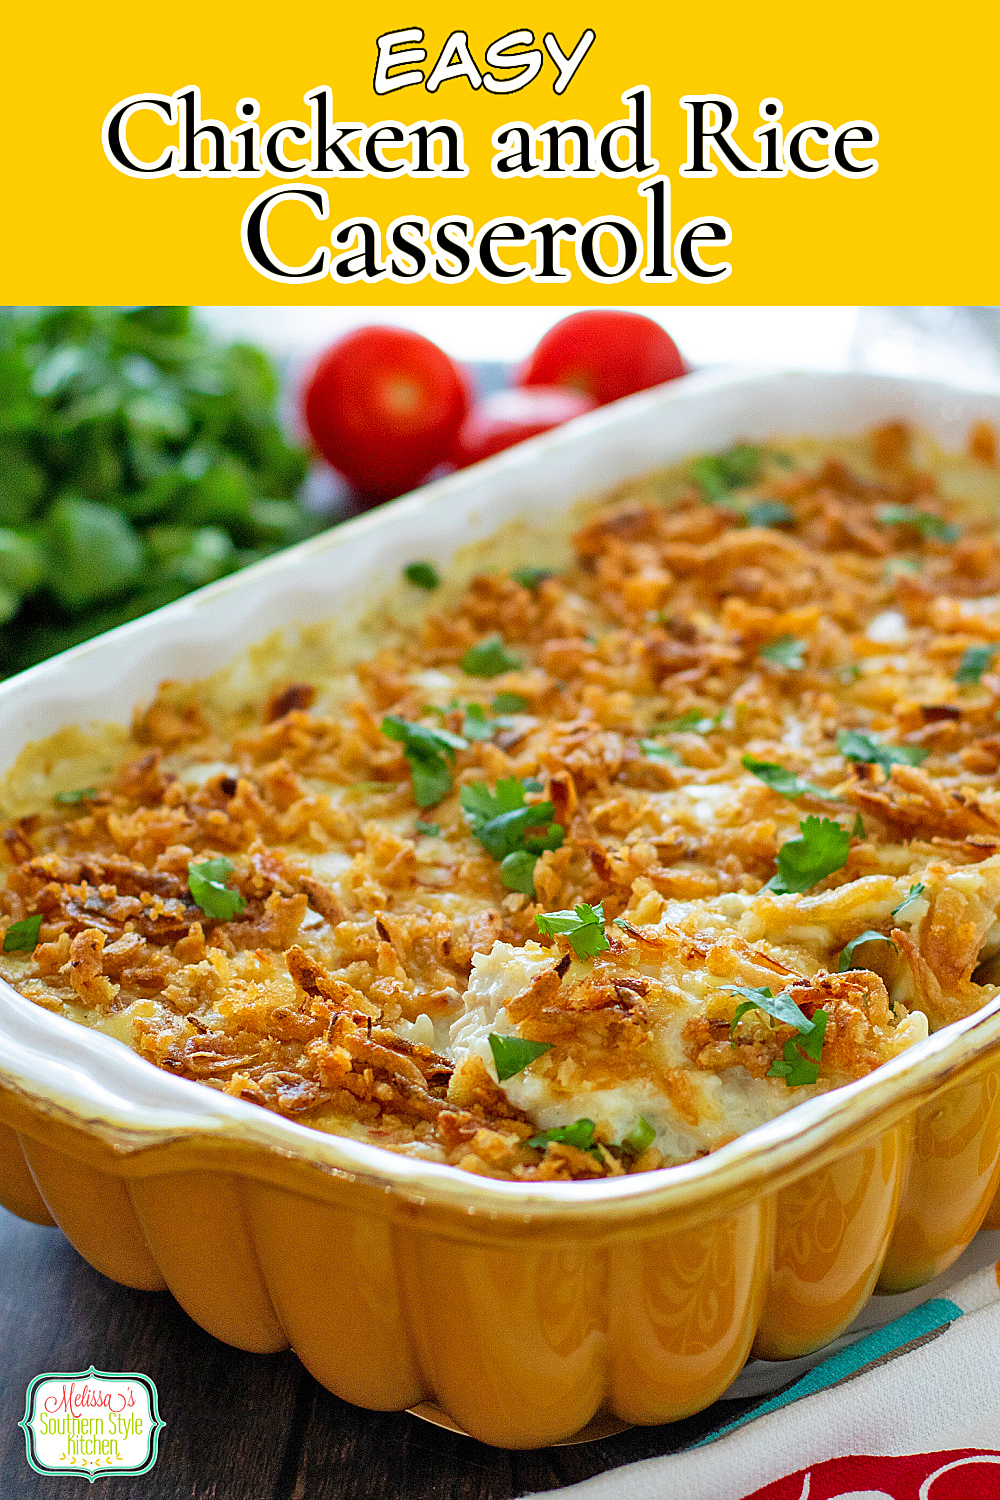 This Easy Chicken and Rice Casserole features plenty of pepper jack cheese and green chiles adding a pop of flavor. #chickencasserole #easychickenrecipes #casseroles #ricerecipes #ricecasserole #chickenandrice